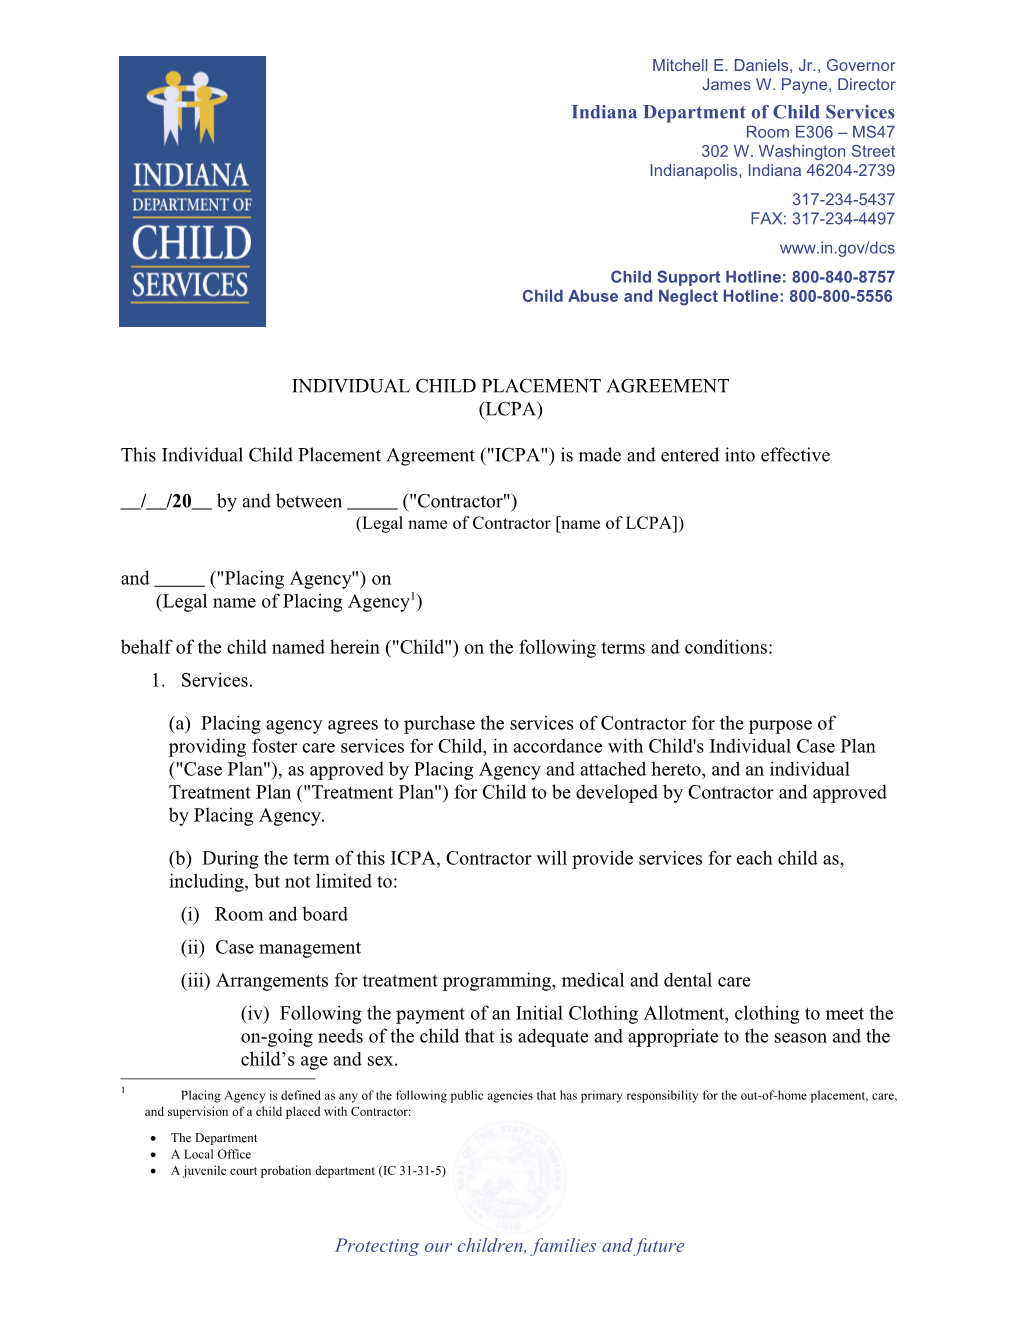 Individual Child Placement Agreement